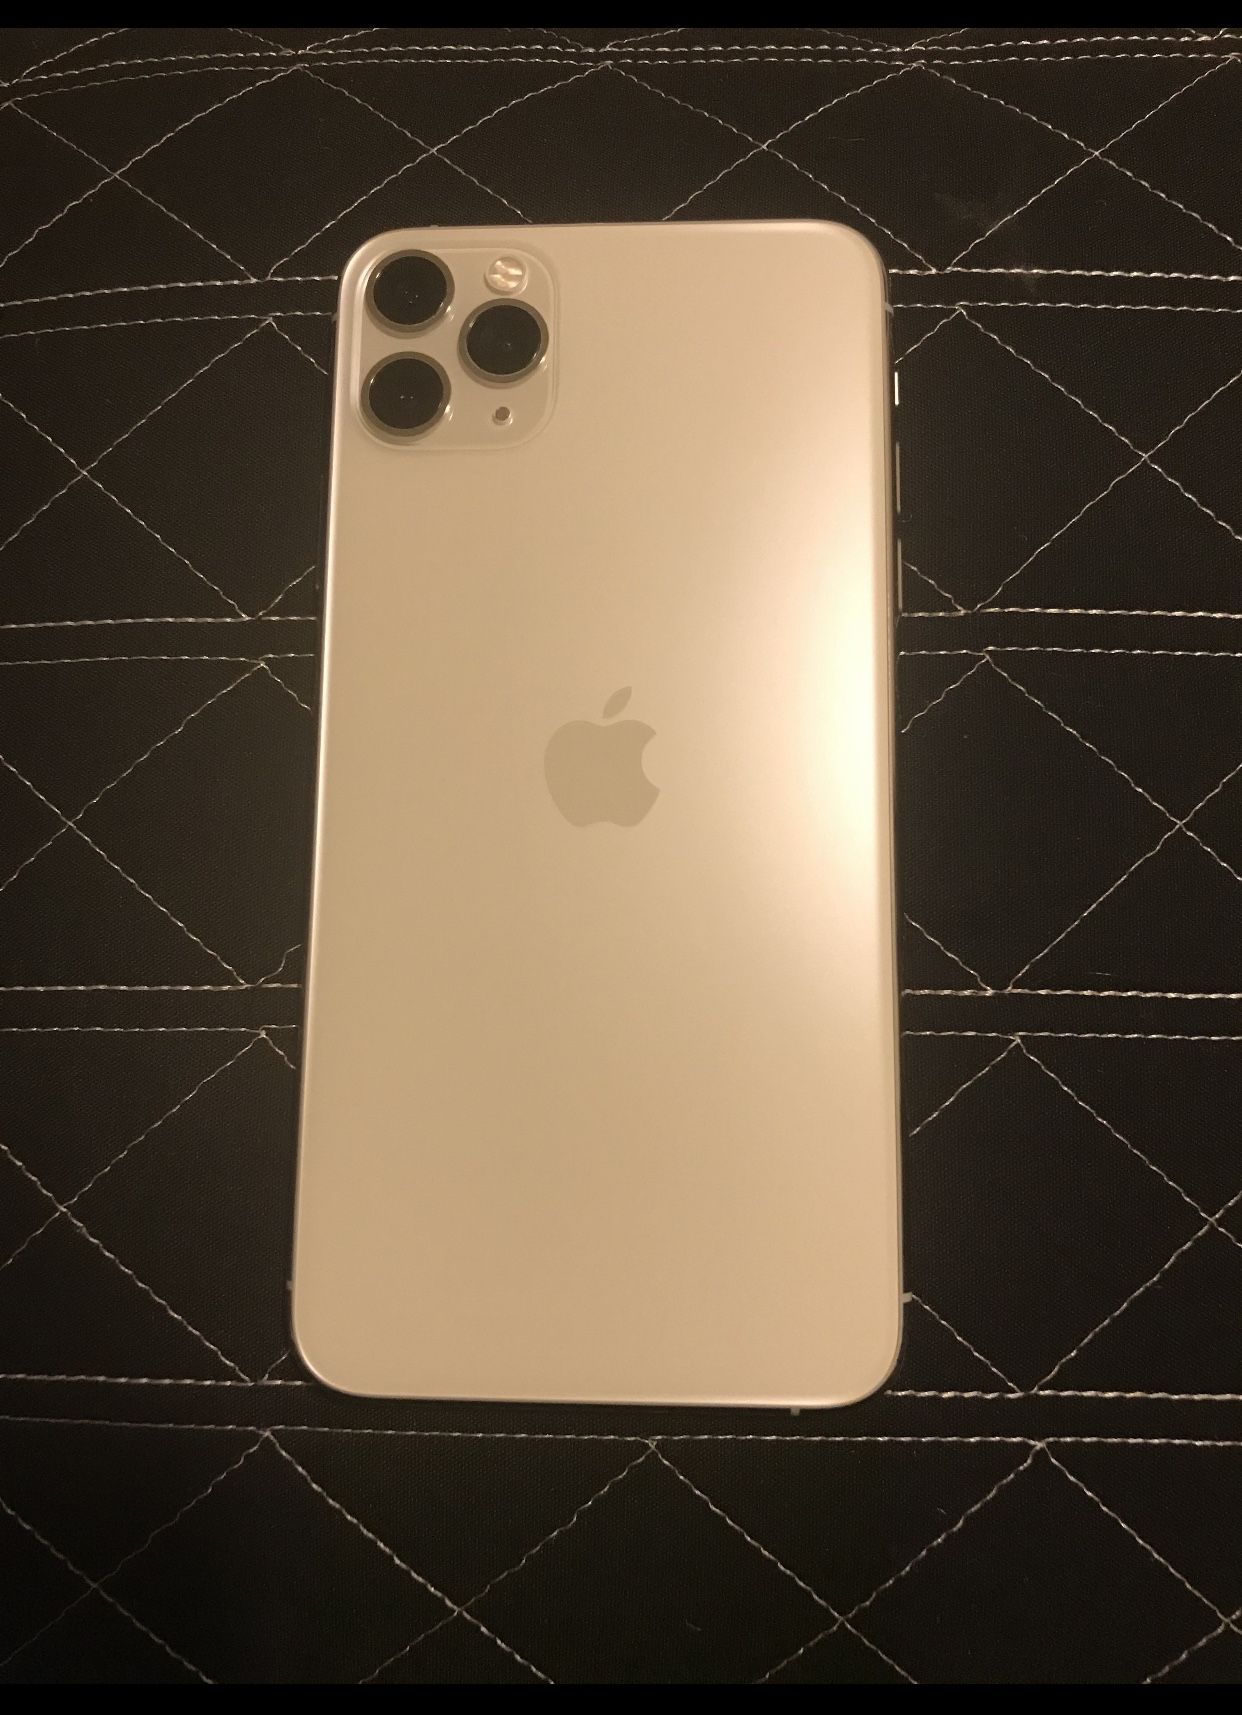 IPHONE 11 pro max (Carrier Verizon ONLY)